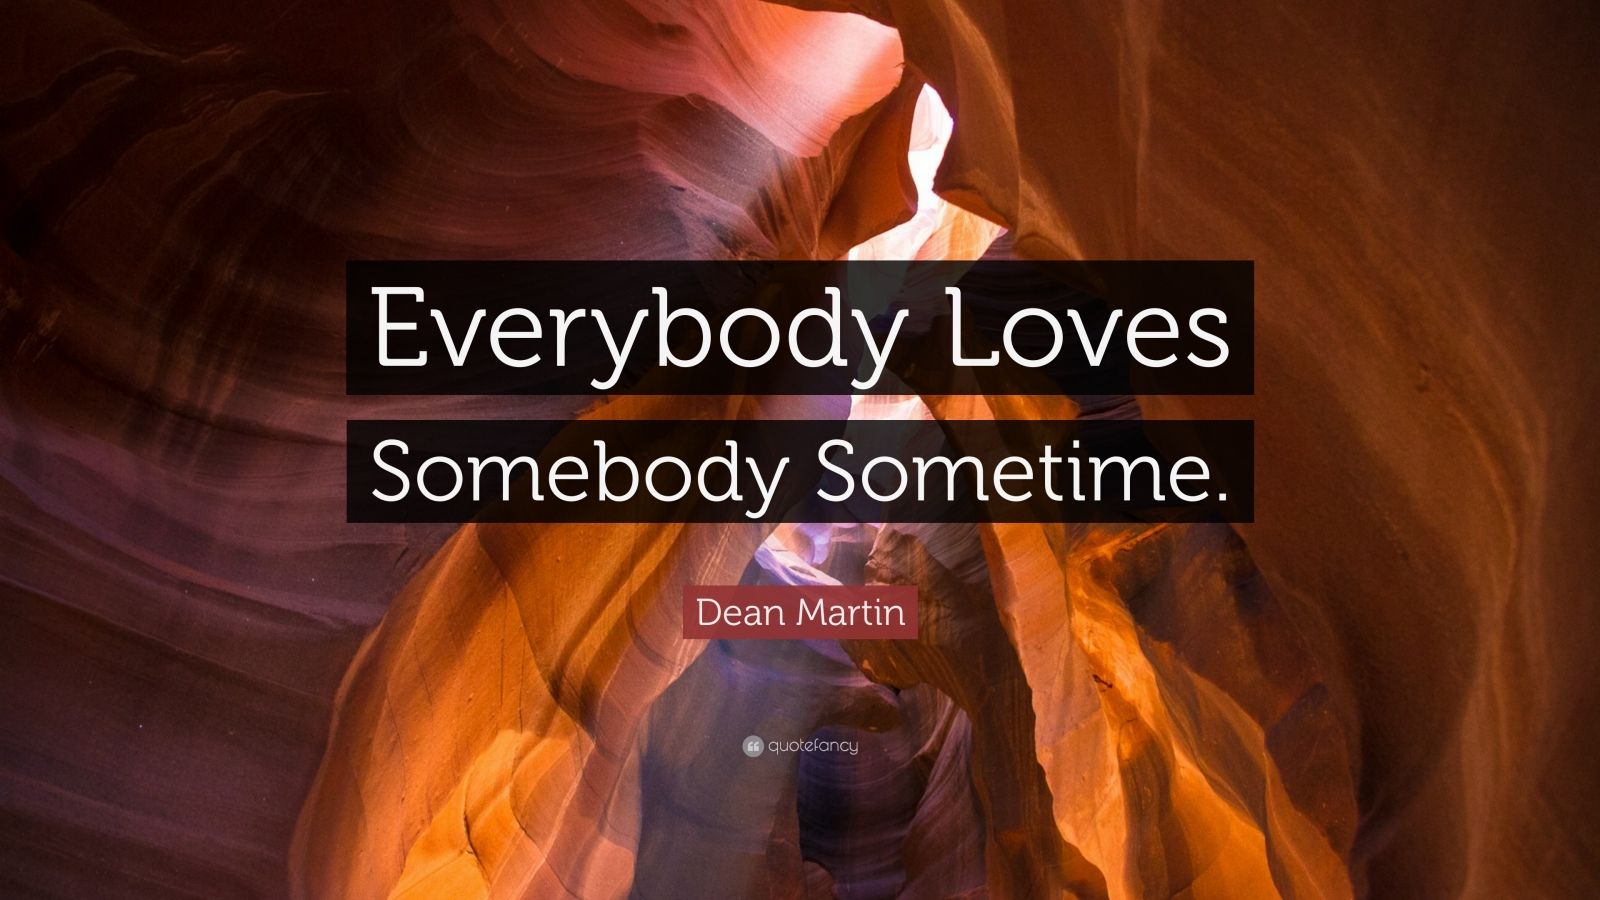 Dean Martin Quote: “Everybody Loves Somebody Sometime.”